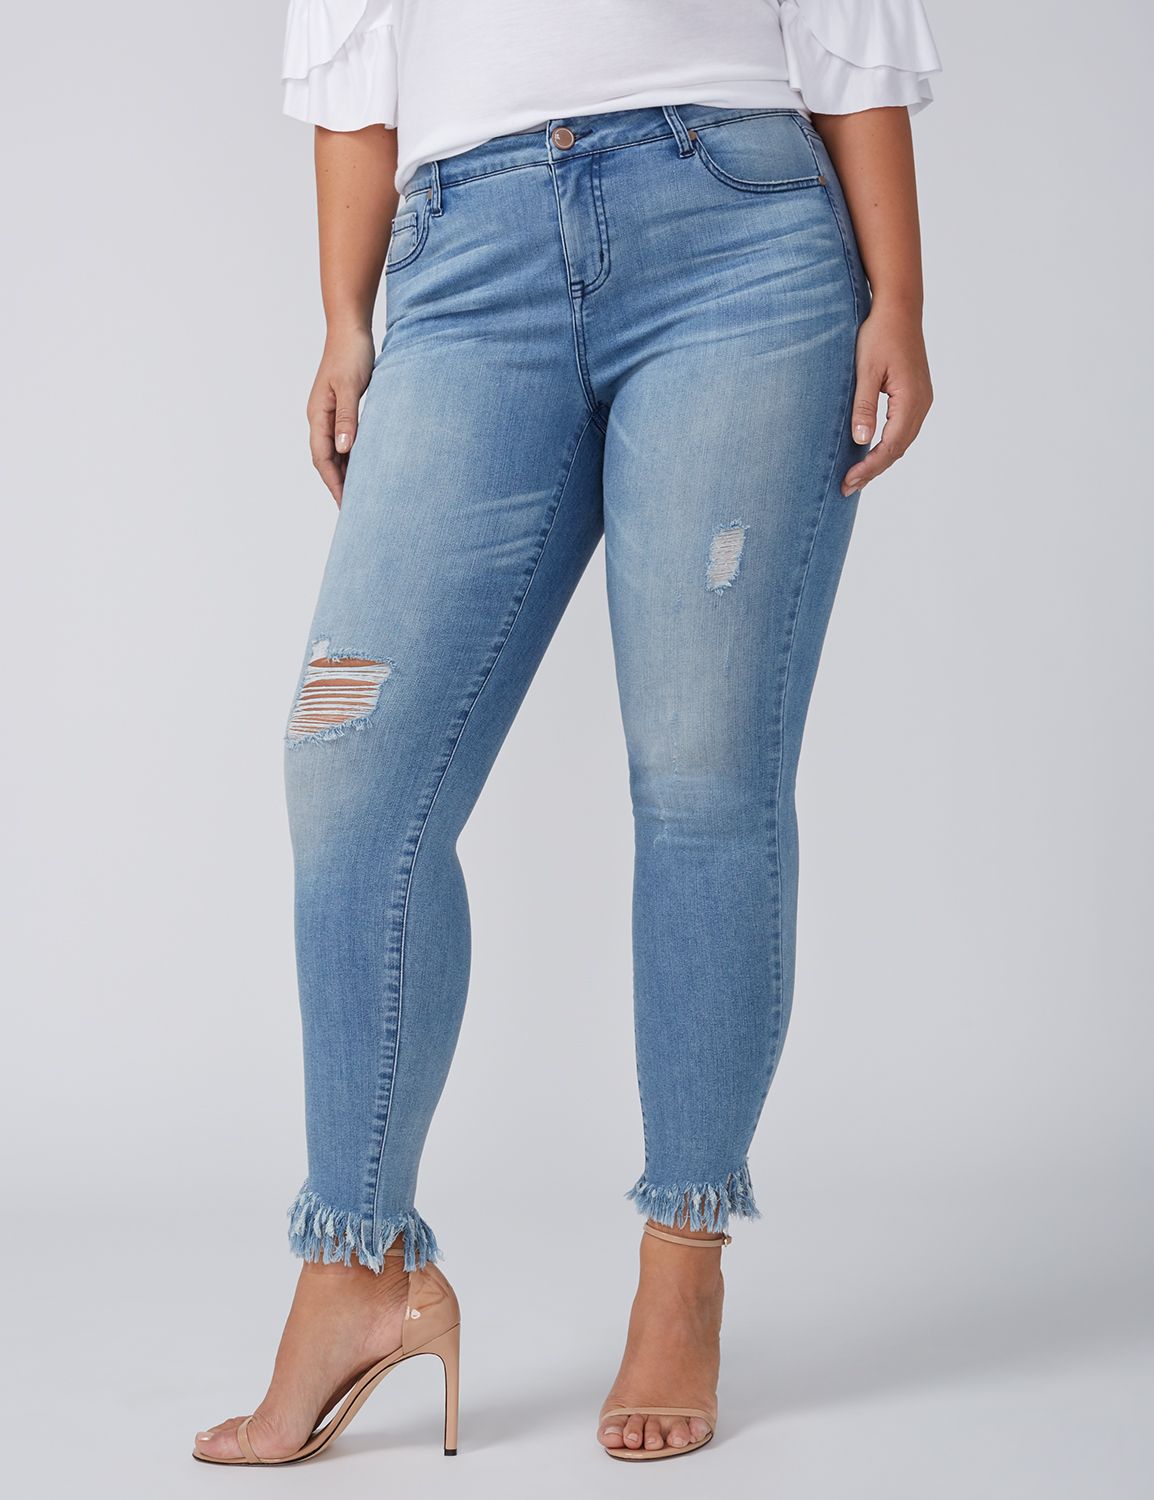 Plus Size Jeans | Styles Including Skinny, Bootcut and Boyfriend Jeans ...